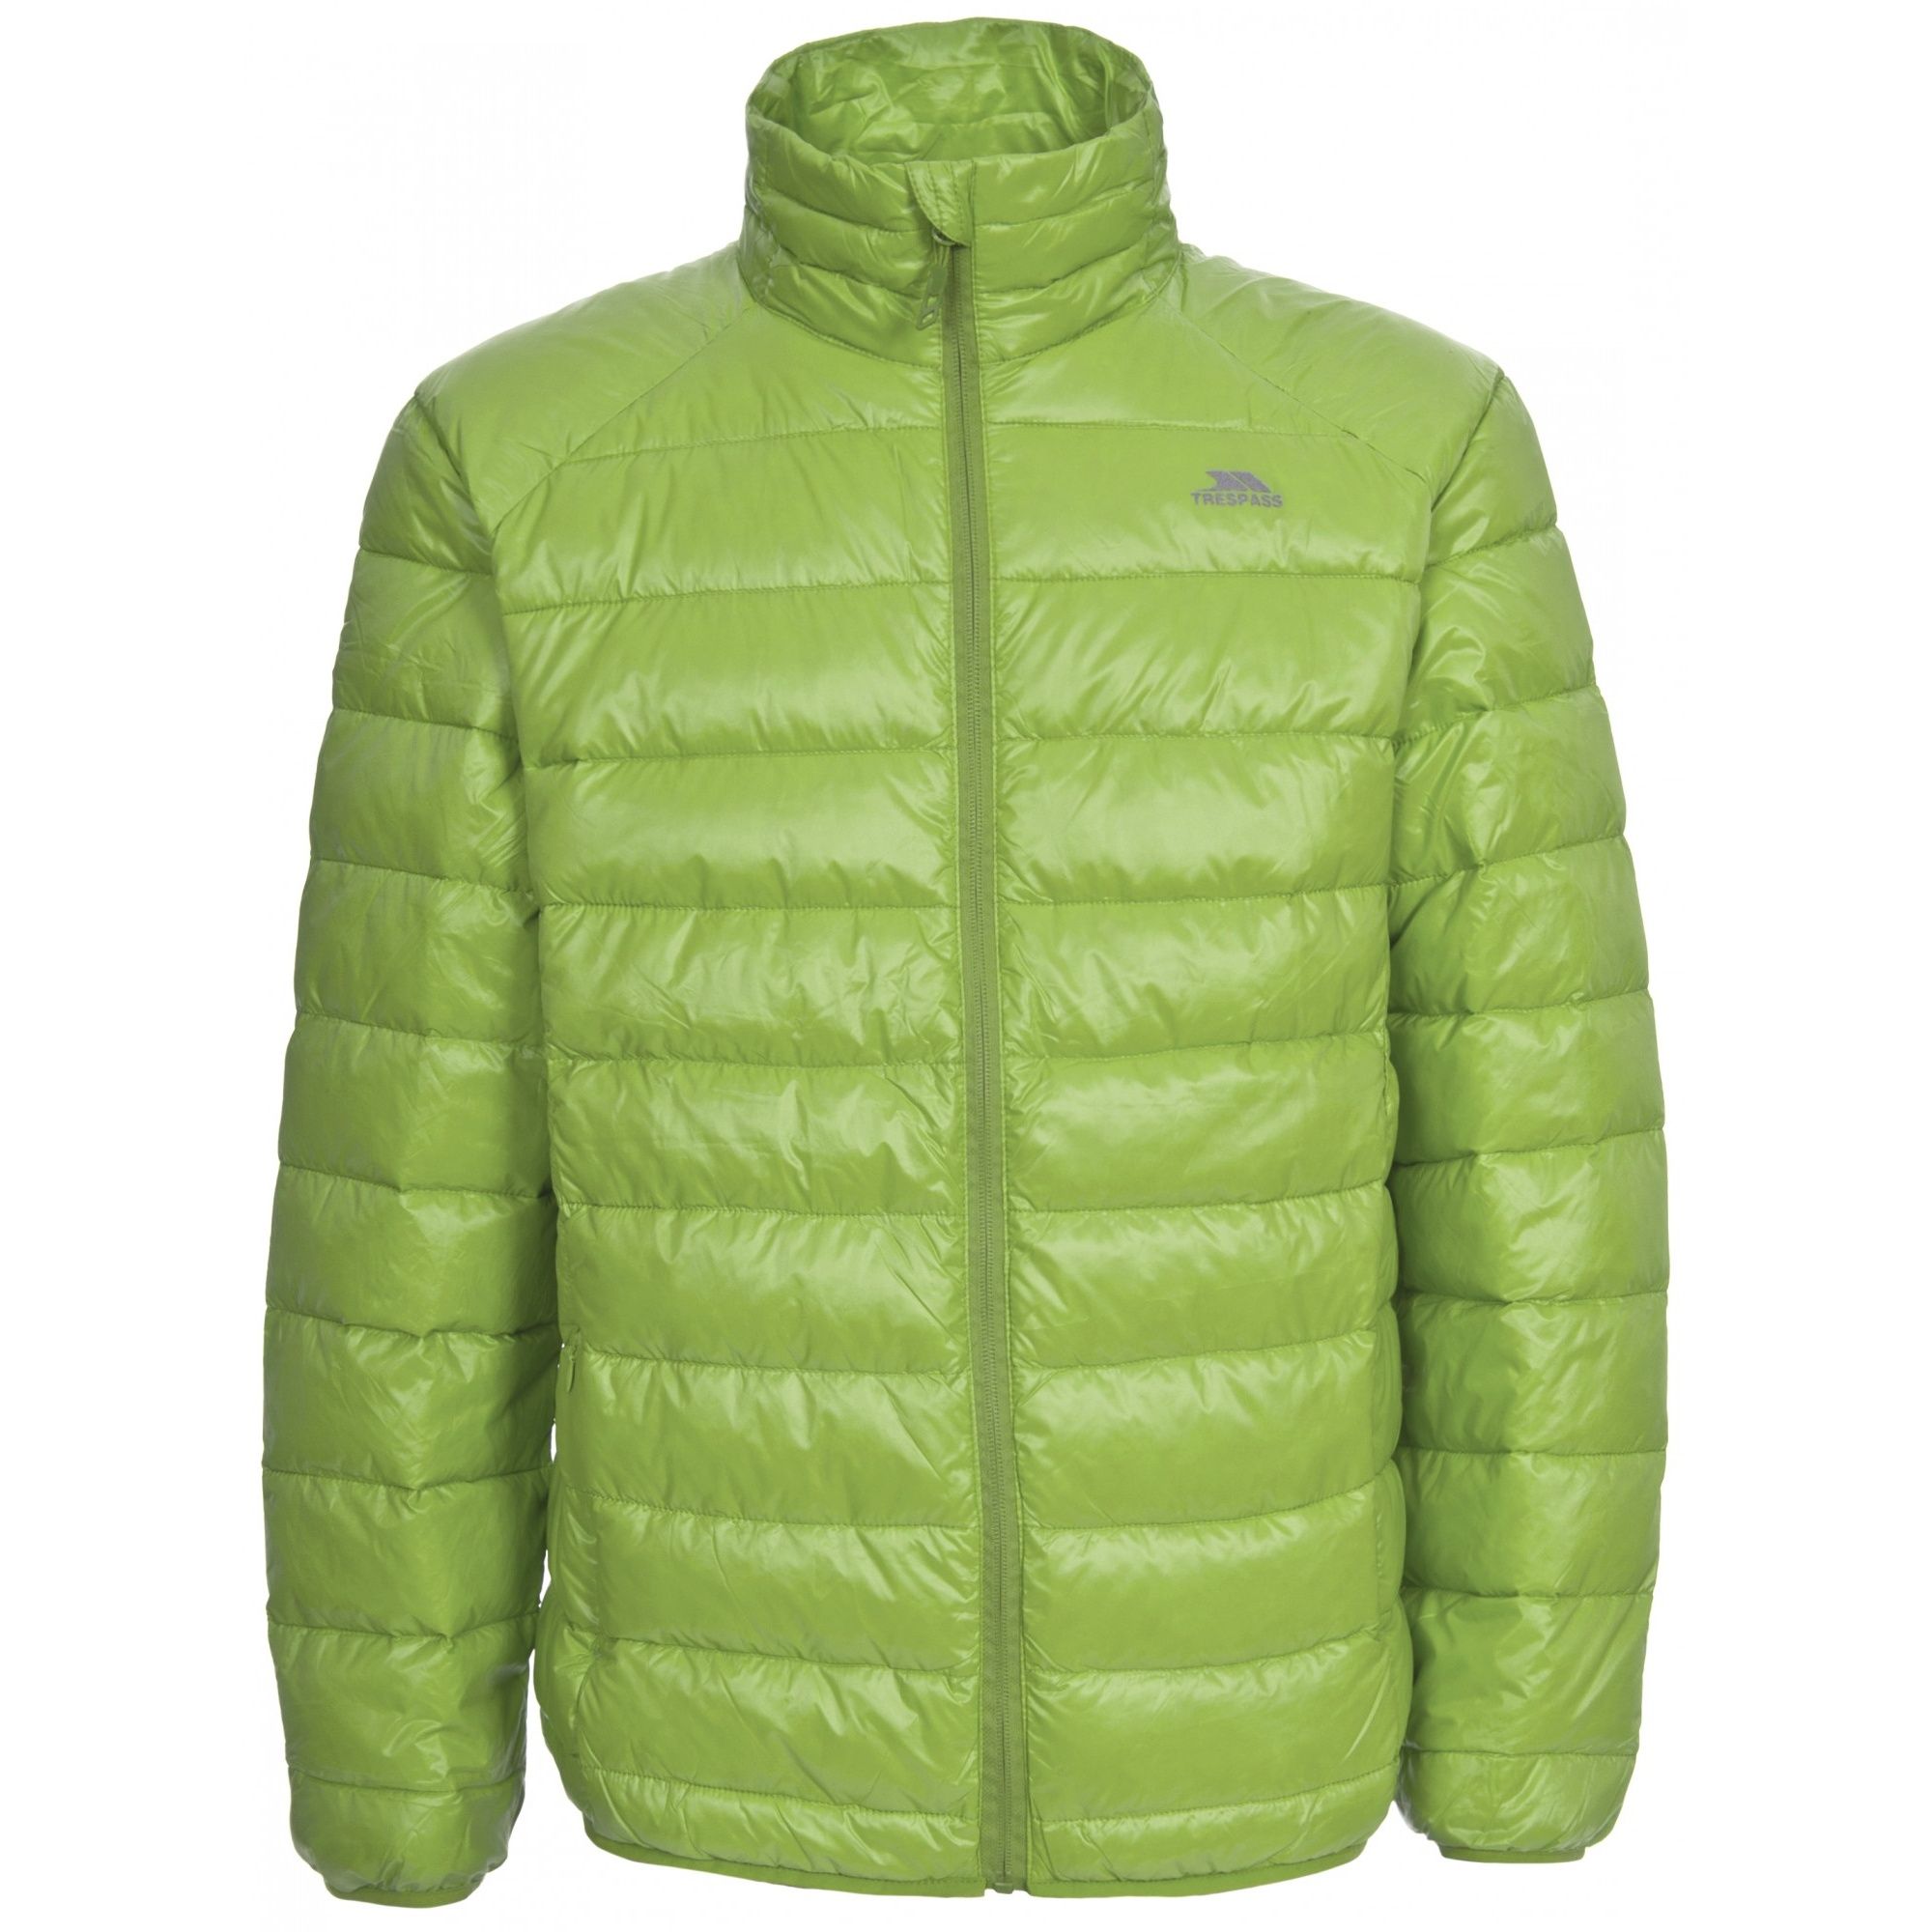 Ultra lightweight jacket. 2 Concealed zip pockets. Low profile front zip. Stuff sack in pocket. Matching binding at hem and cuff. 80% Down/20% Feather. Shell: 100% Polyamide, Lining: 100% Polyamide, Downproof Lining. Trespass Mens Chest Sizing (approx): S - 35-37in/89-94cm, M - 38-40in/96.5-101.5cm, L - 41-43in/104-109cm, XL - 44-46in/111.5-117cm, XXL - 46-48in/117-122cm, 3XL - 48-50in/122-127cm.